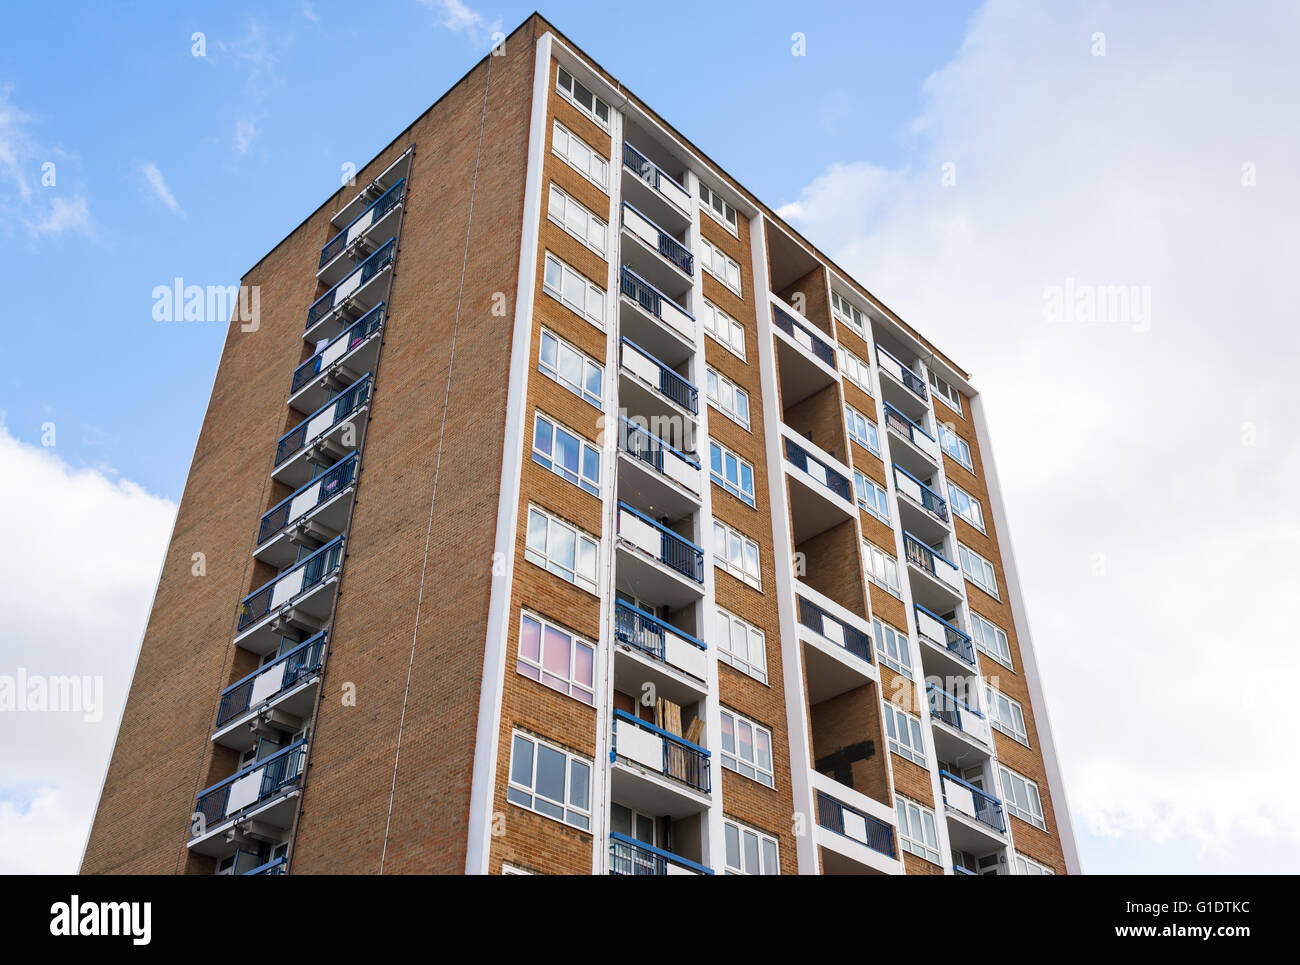 High rise council flat. A council house is a form of public or social housing built by local municipalities in the UK Stock Photo